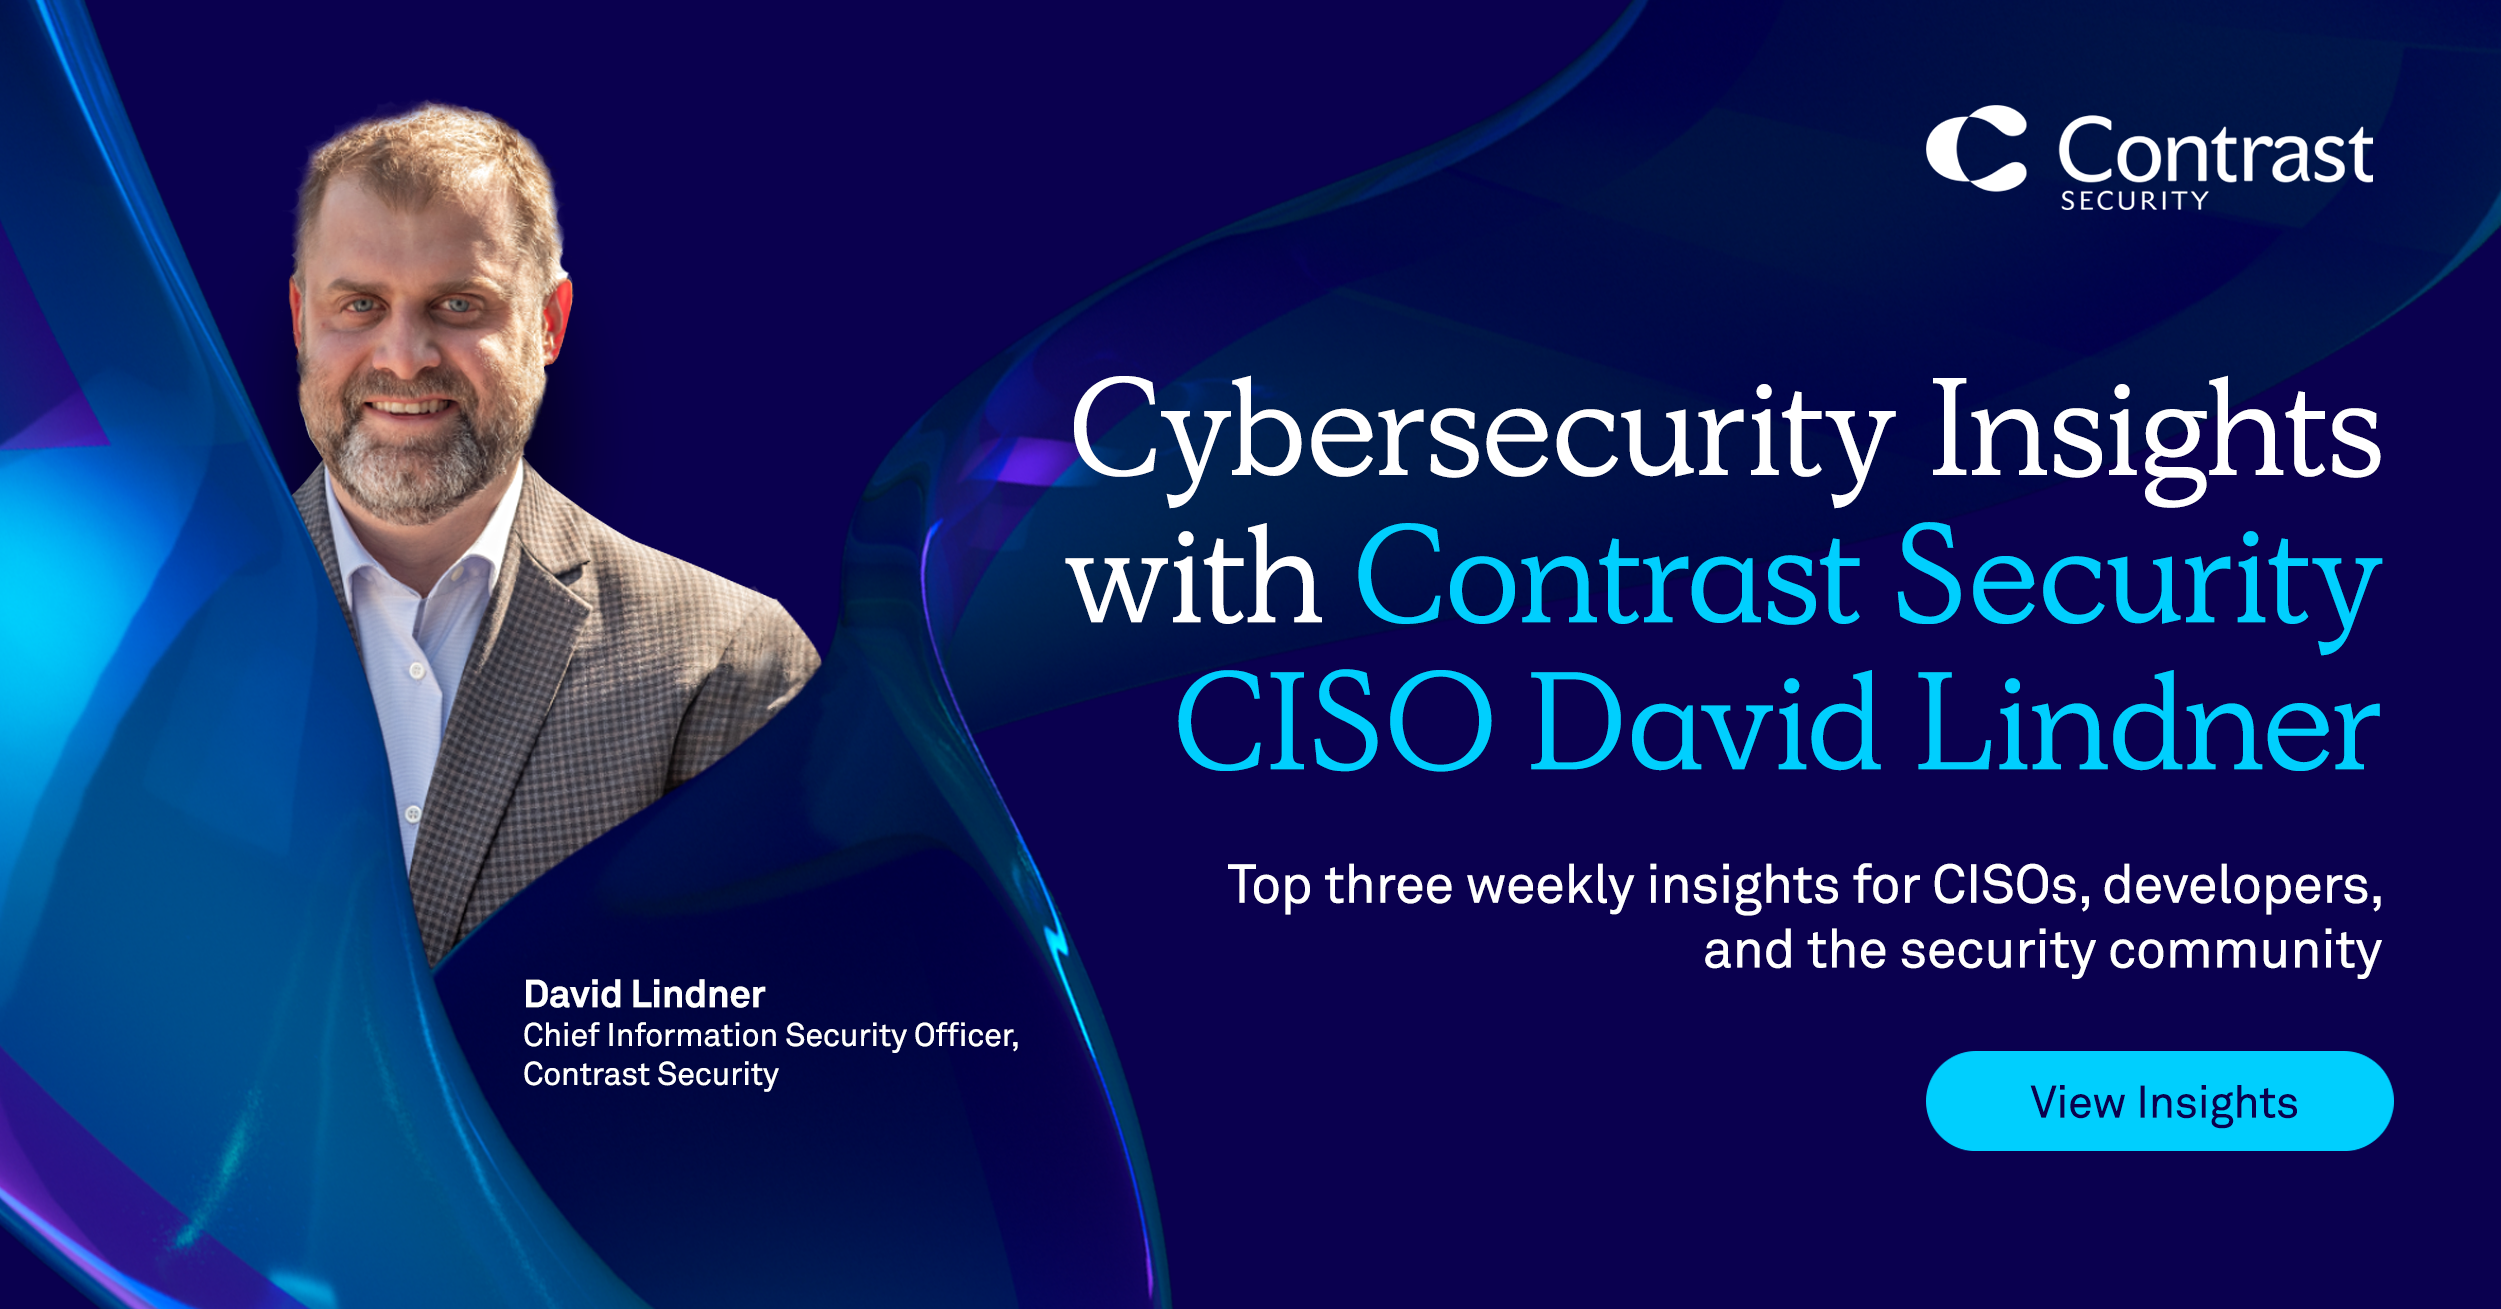 Cybersecurity Insights with Contrast CISO David Lindner | 7/28 – Source: securityboulevard.com